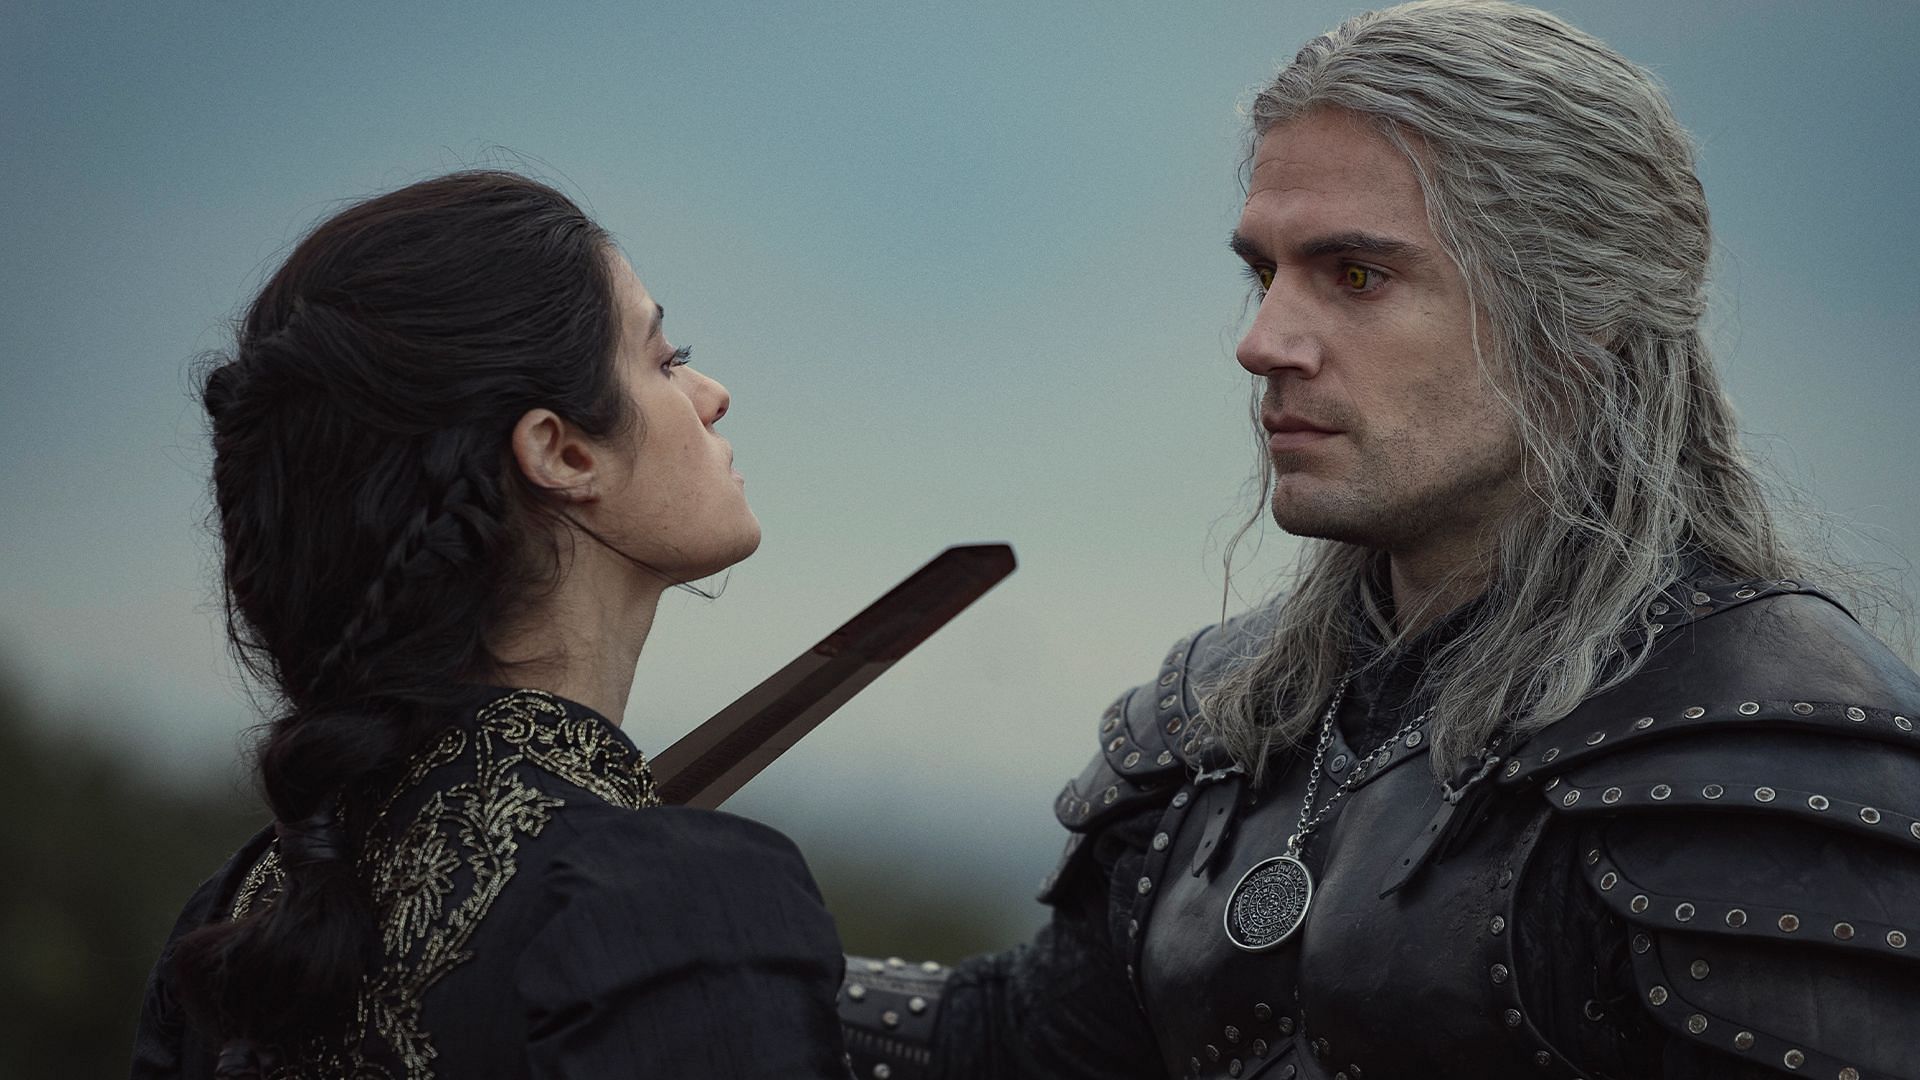 Yennefer and Geralt of Rivia in The Witcher (Image via Netflix)